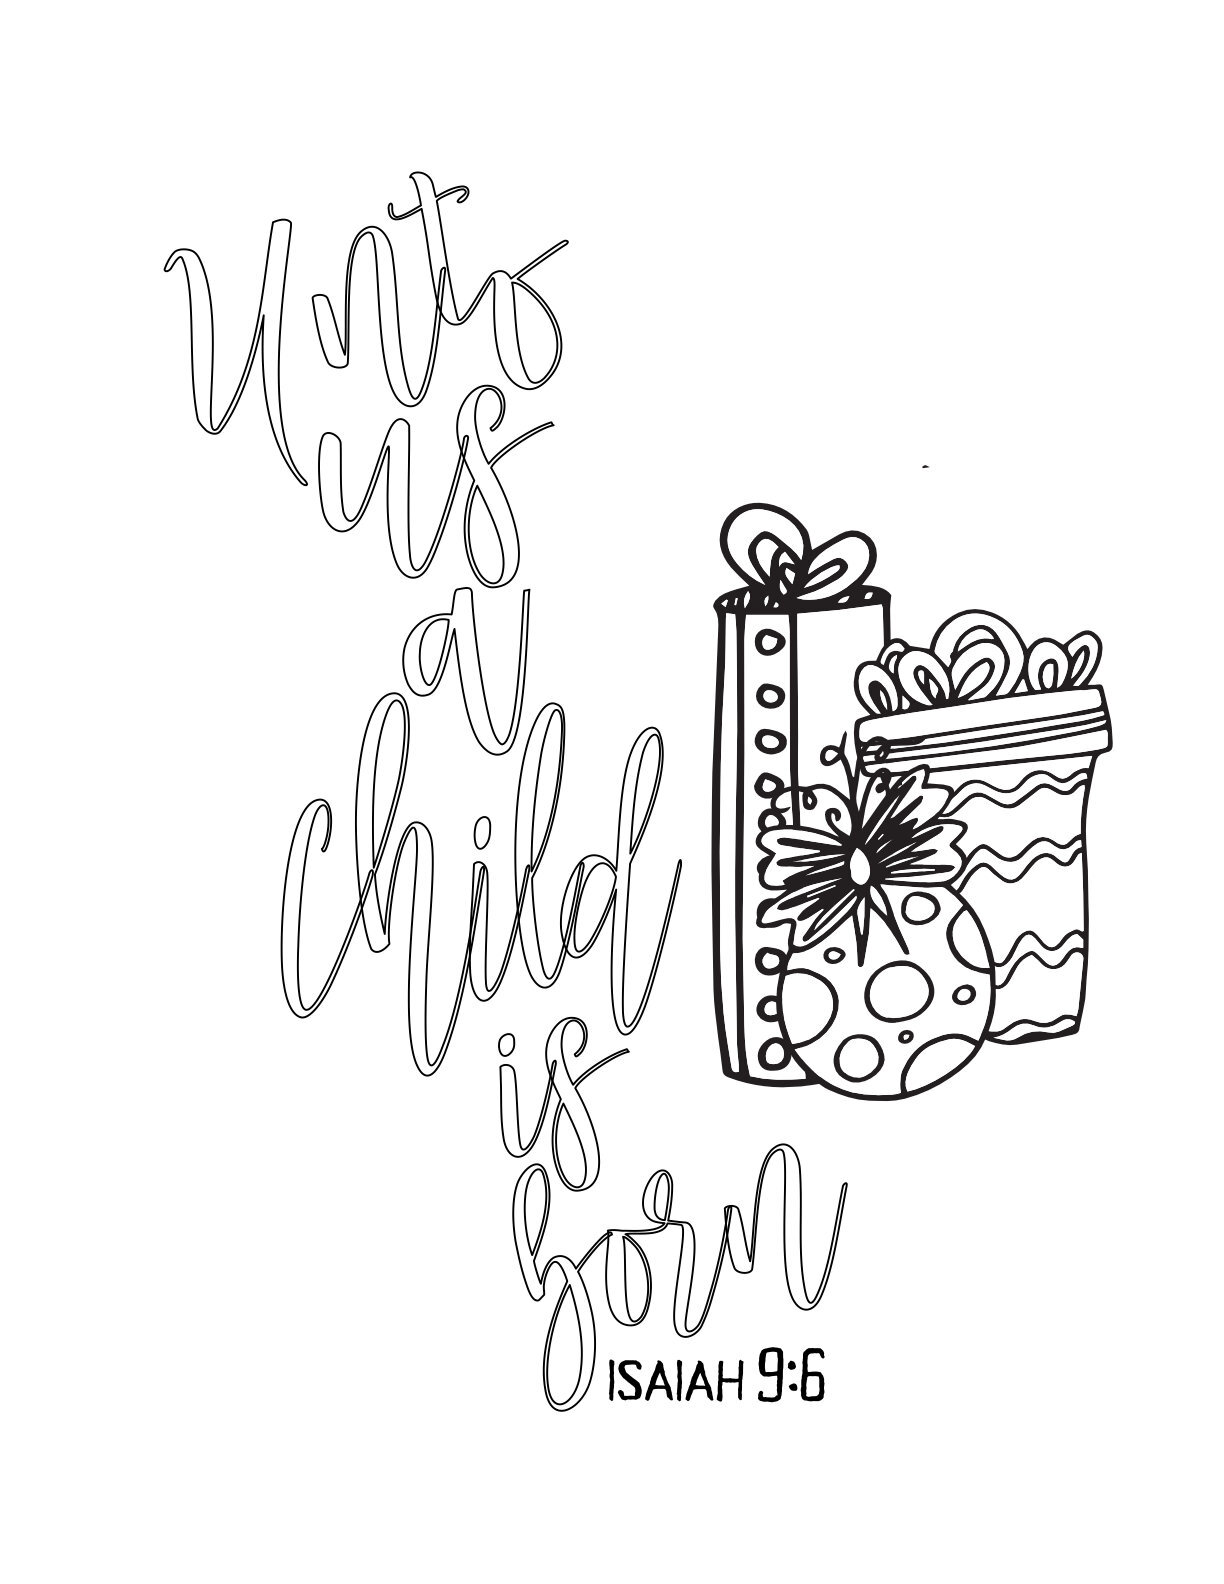 Free Advent Coloring Page - Unto Us A Child Is Born - Isaiah 9:6 CLICK HERE TO DOWNLOAD YOUR FREE COLORING PAGE